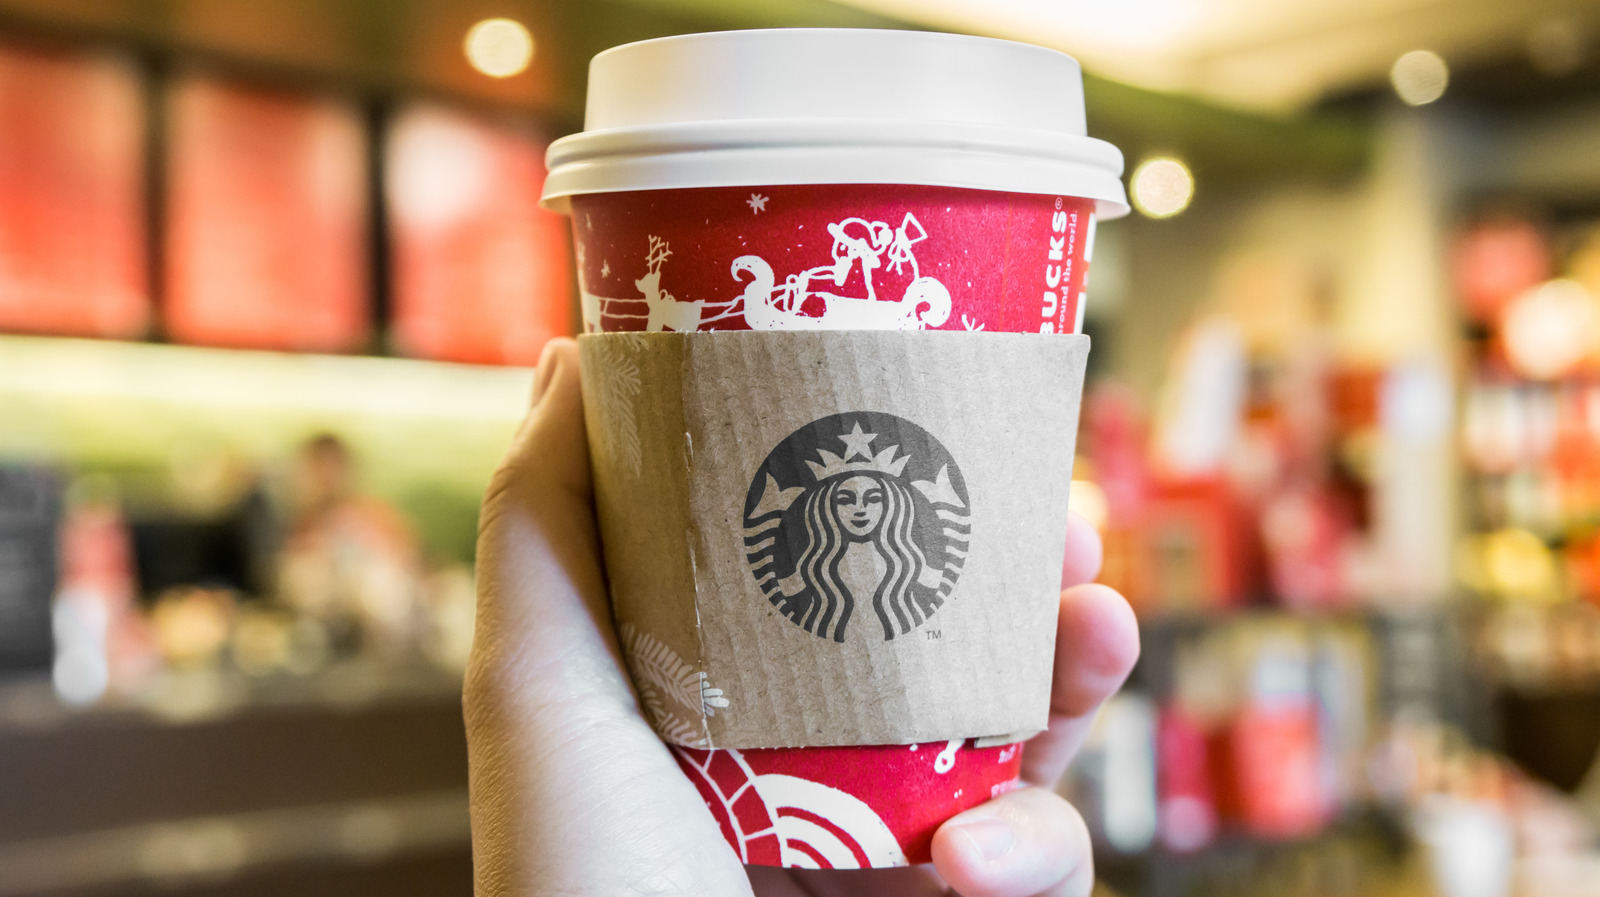 https://www.tastingtable.com/img/gallery/the-time-starbucks-red-cups-stirred-up-a-world-of-controversy/l-intro-1672773615.jpg